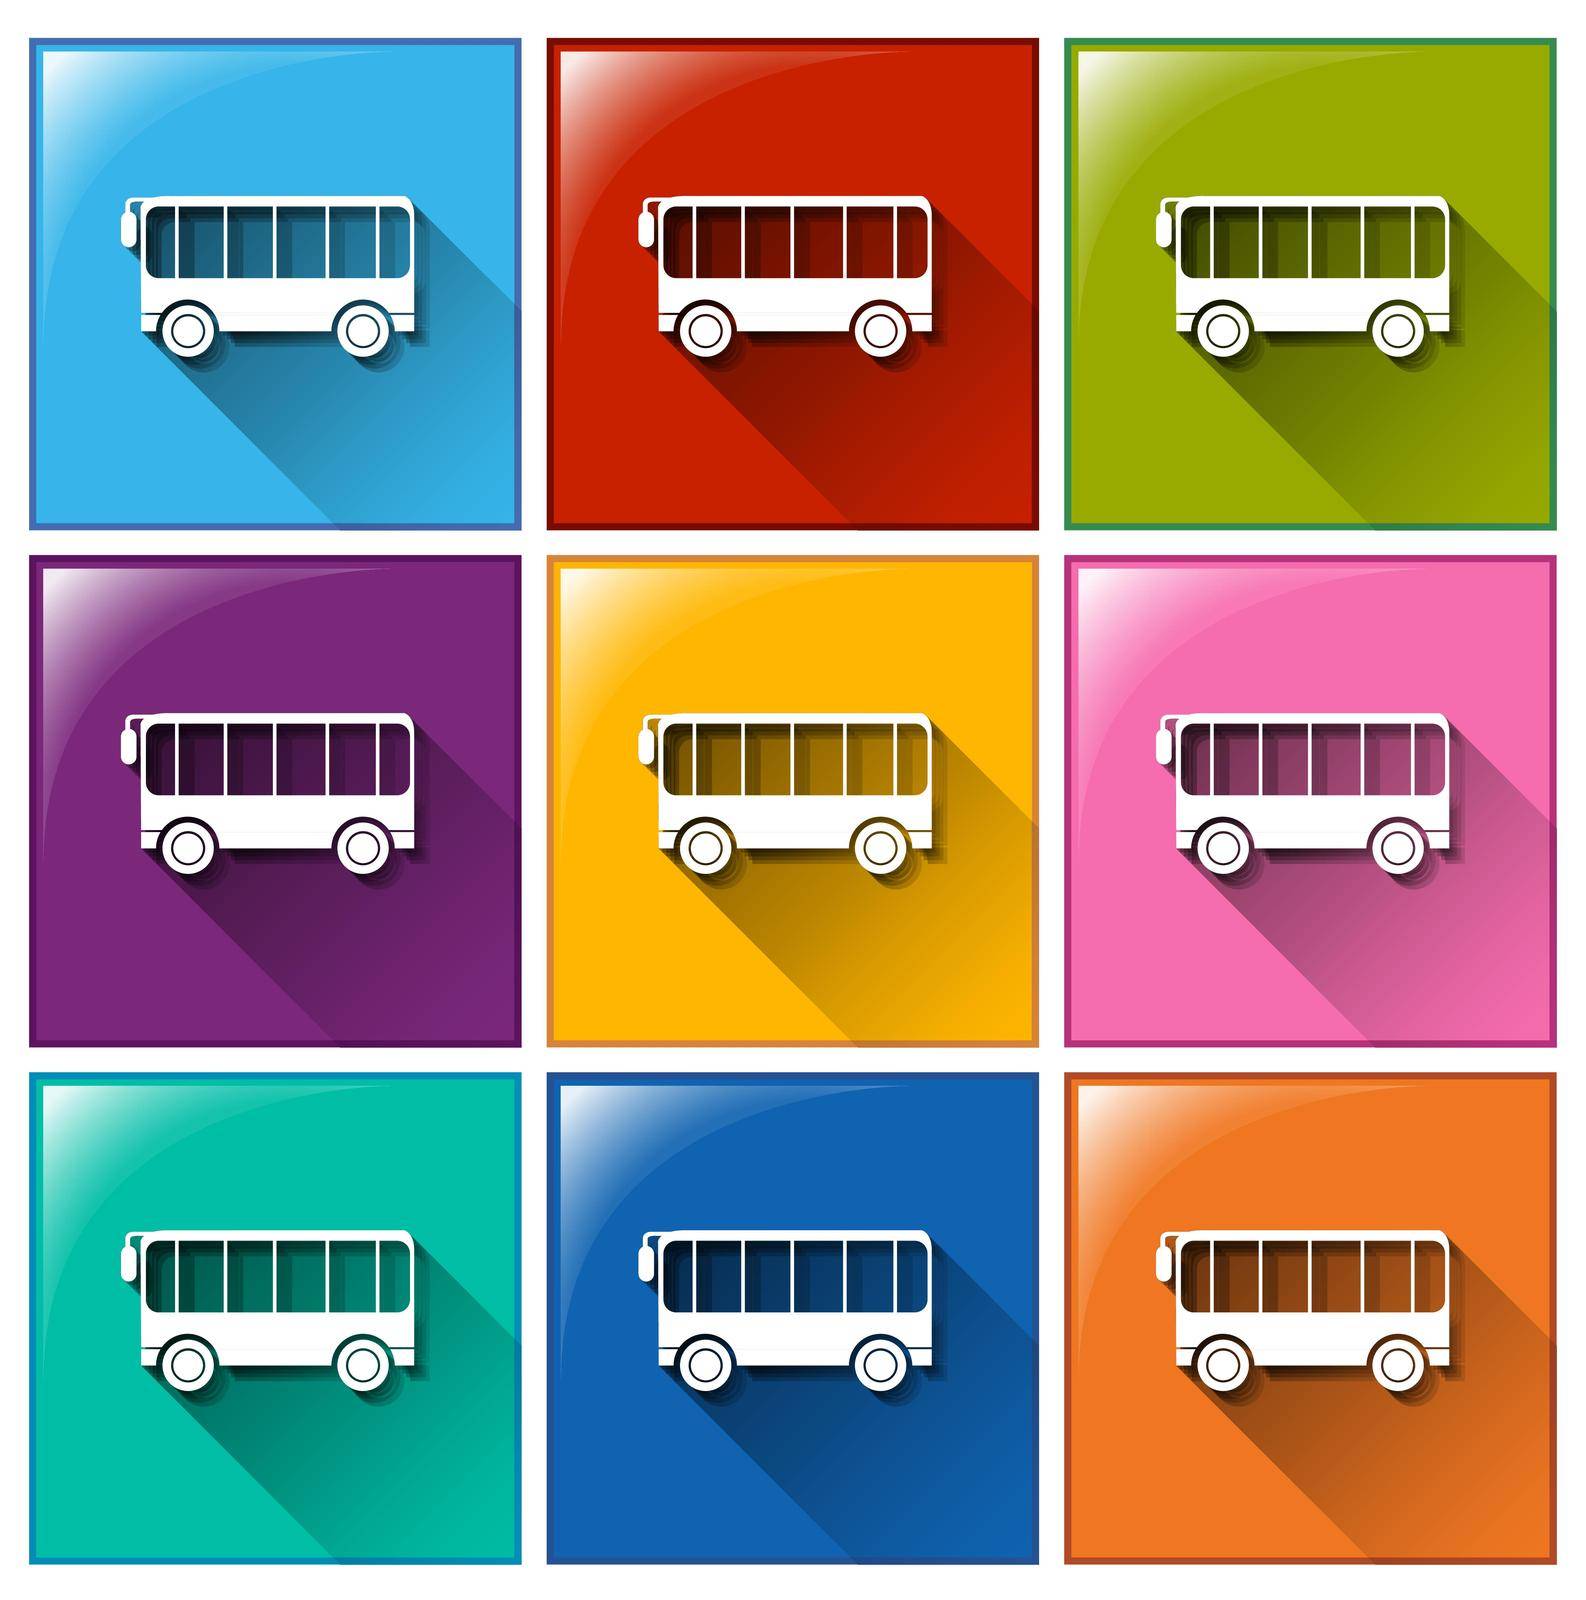 Square buttons with vehicles on a white background